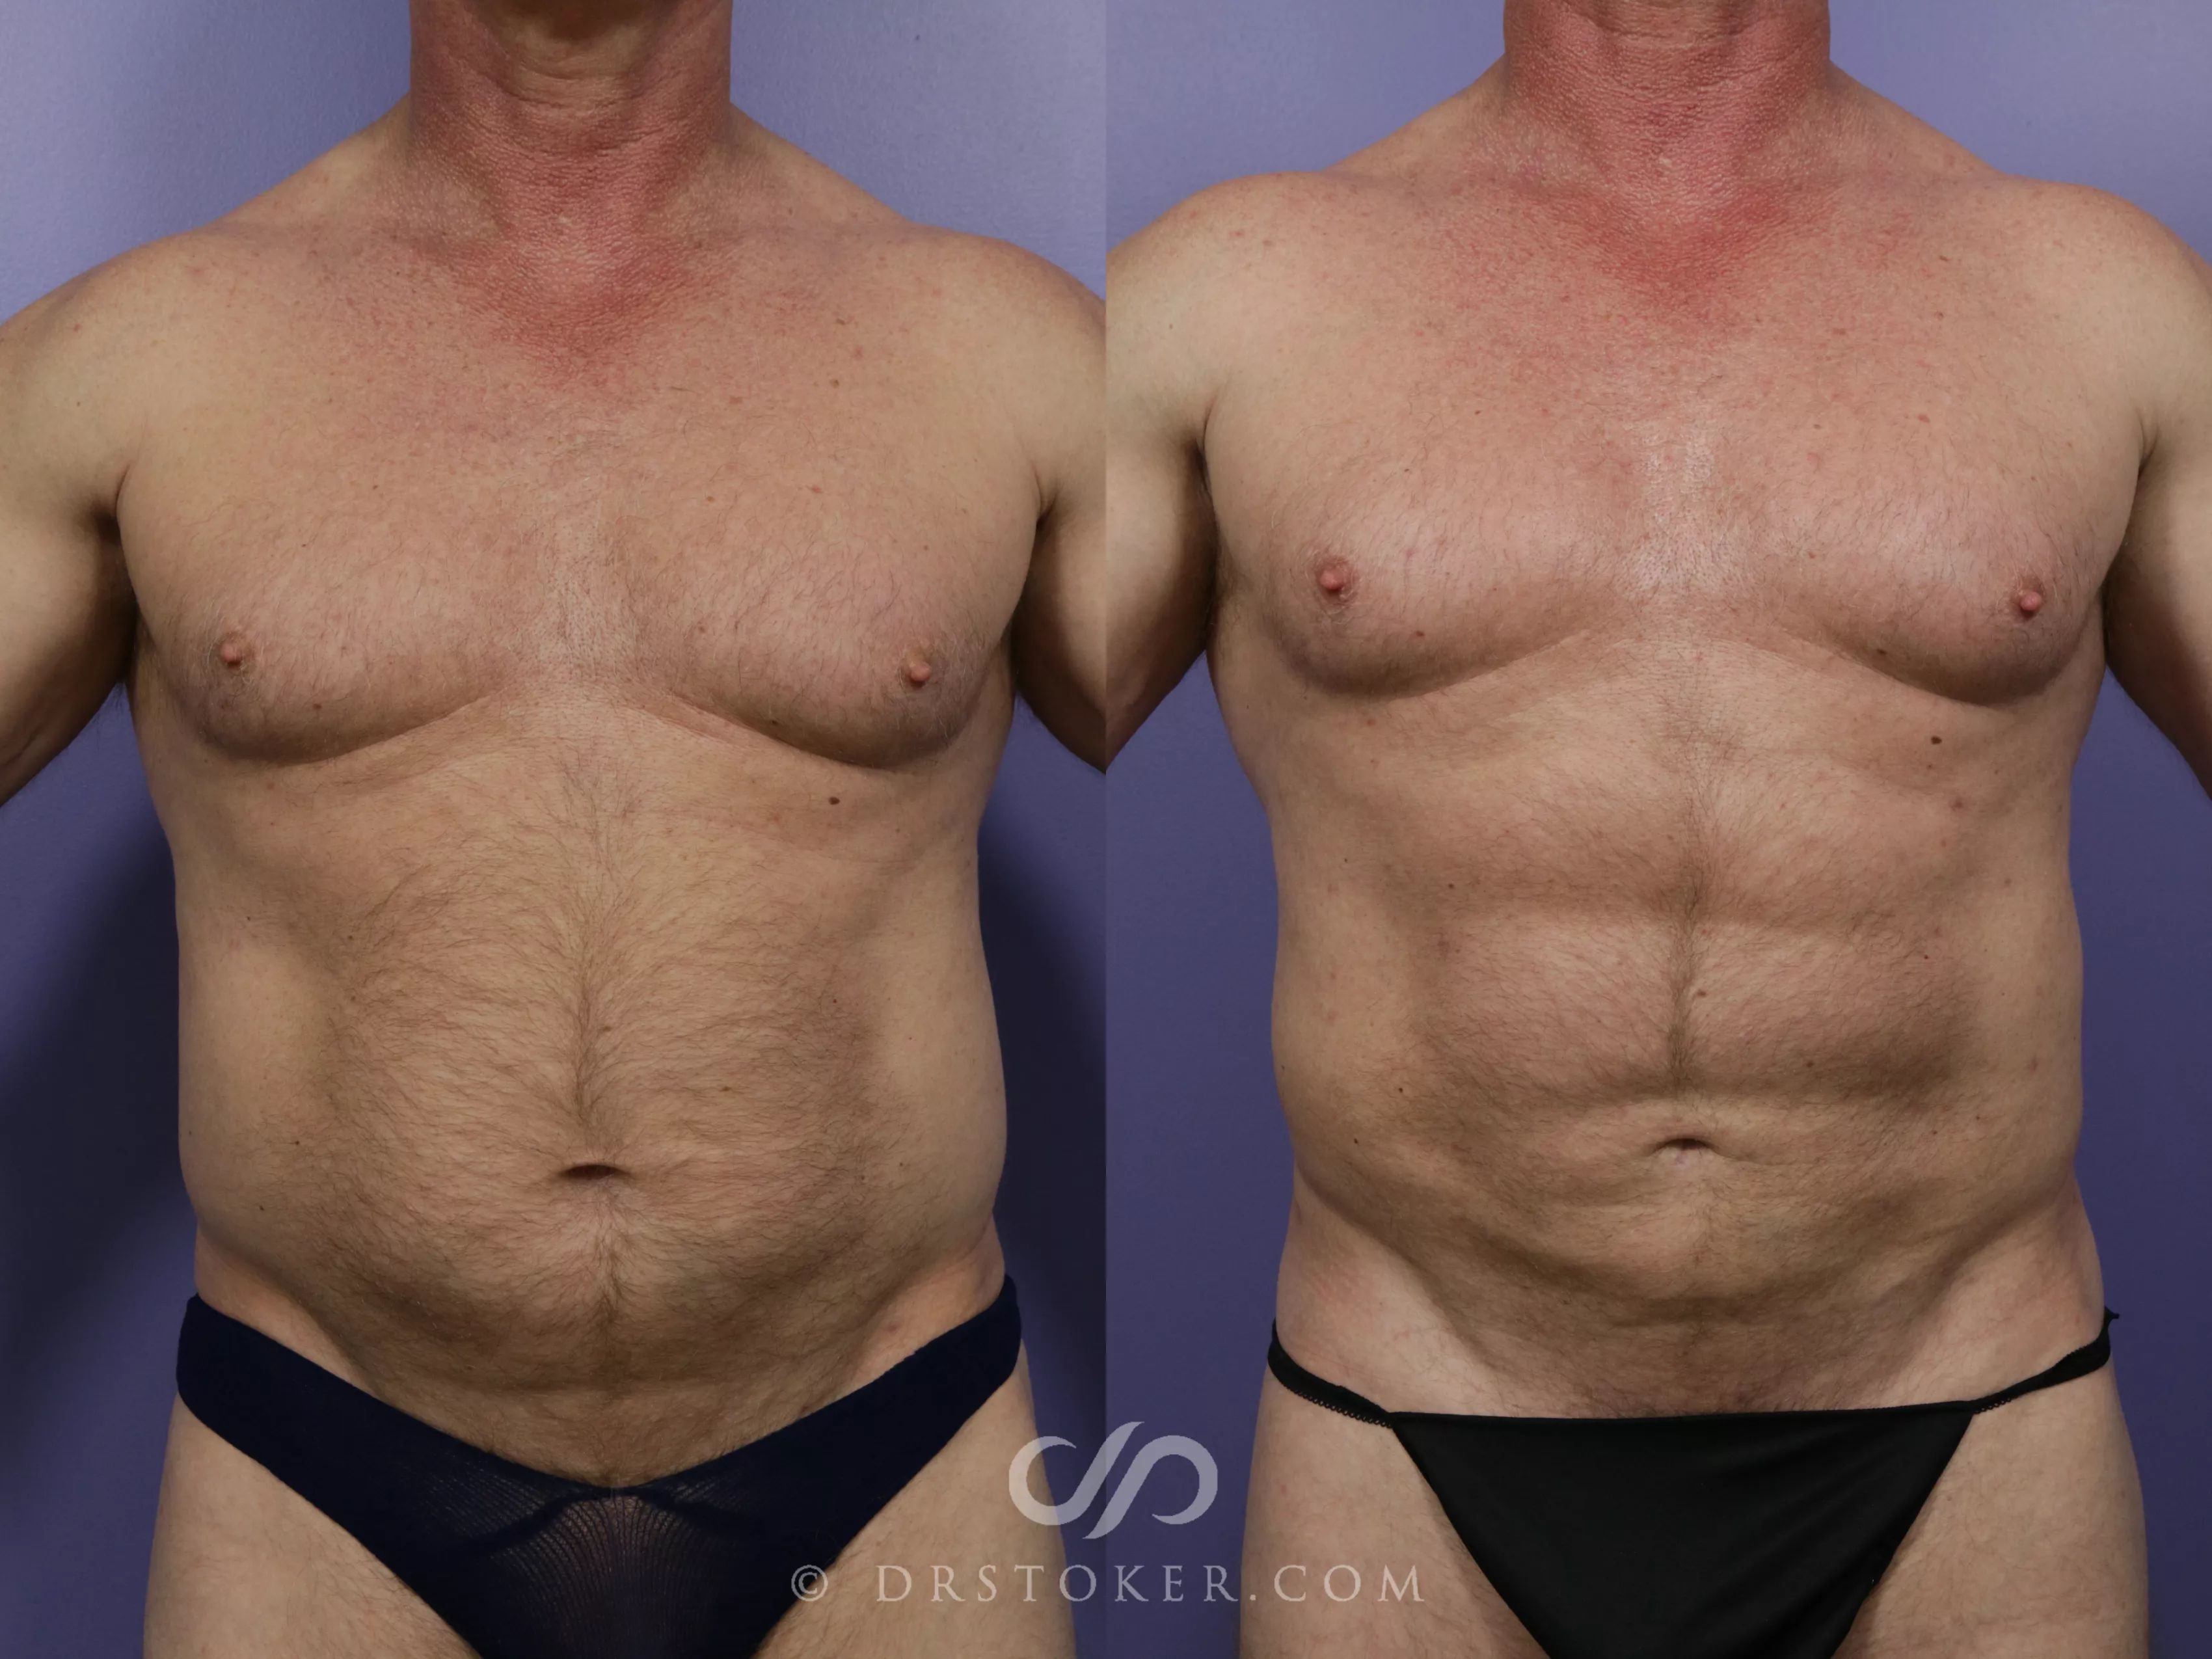 Tampa Surgical Arts - AB ETCHING One of our most common procedures is ab  sculpting. There are many misconceptions about this procedure and what it  can and cannot do. The simplest way